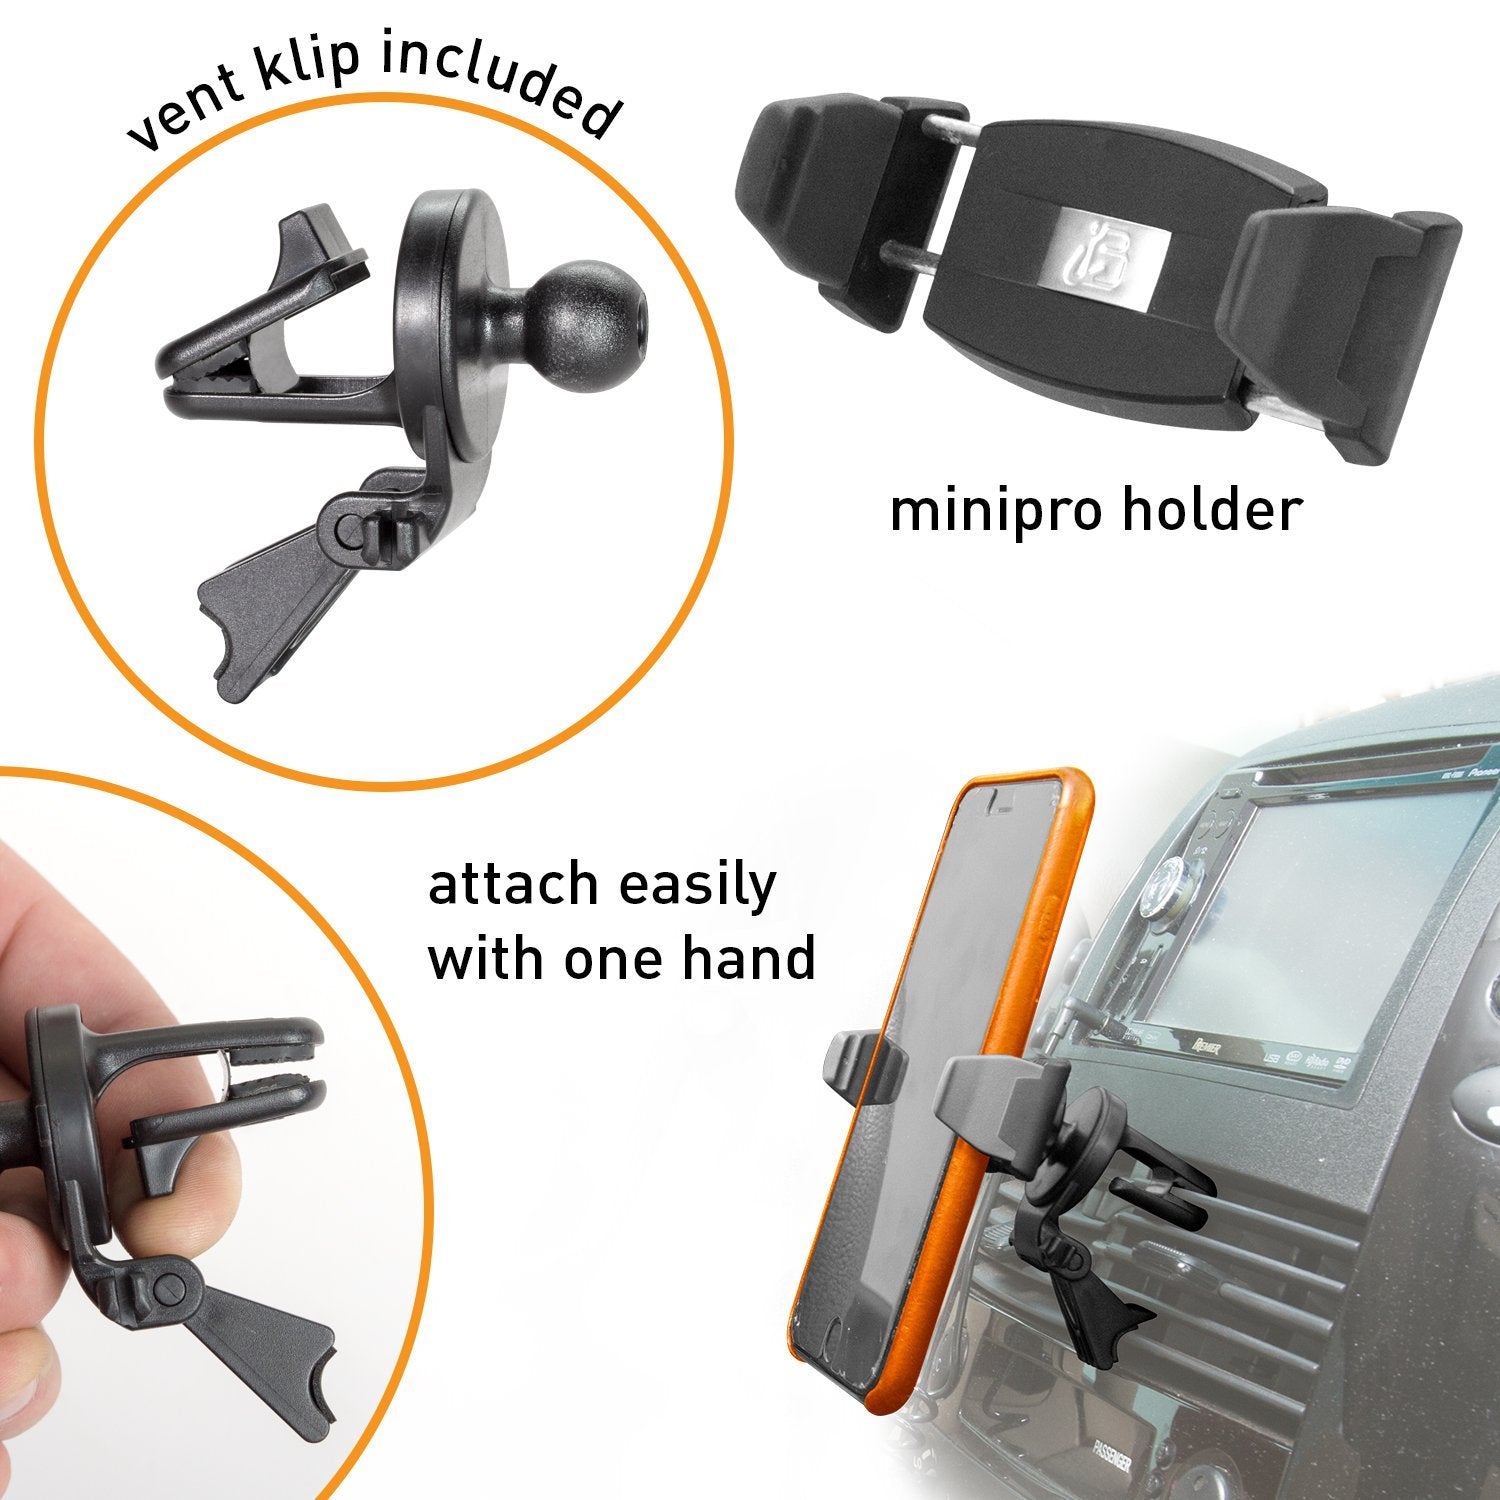 miniProXL™ Vent Kit for all Smartphones